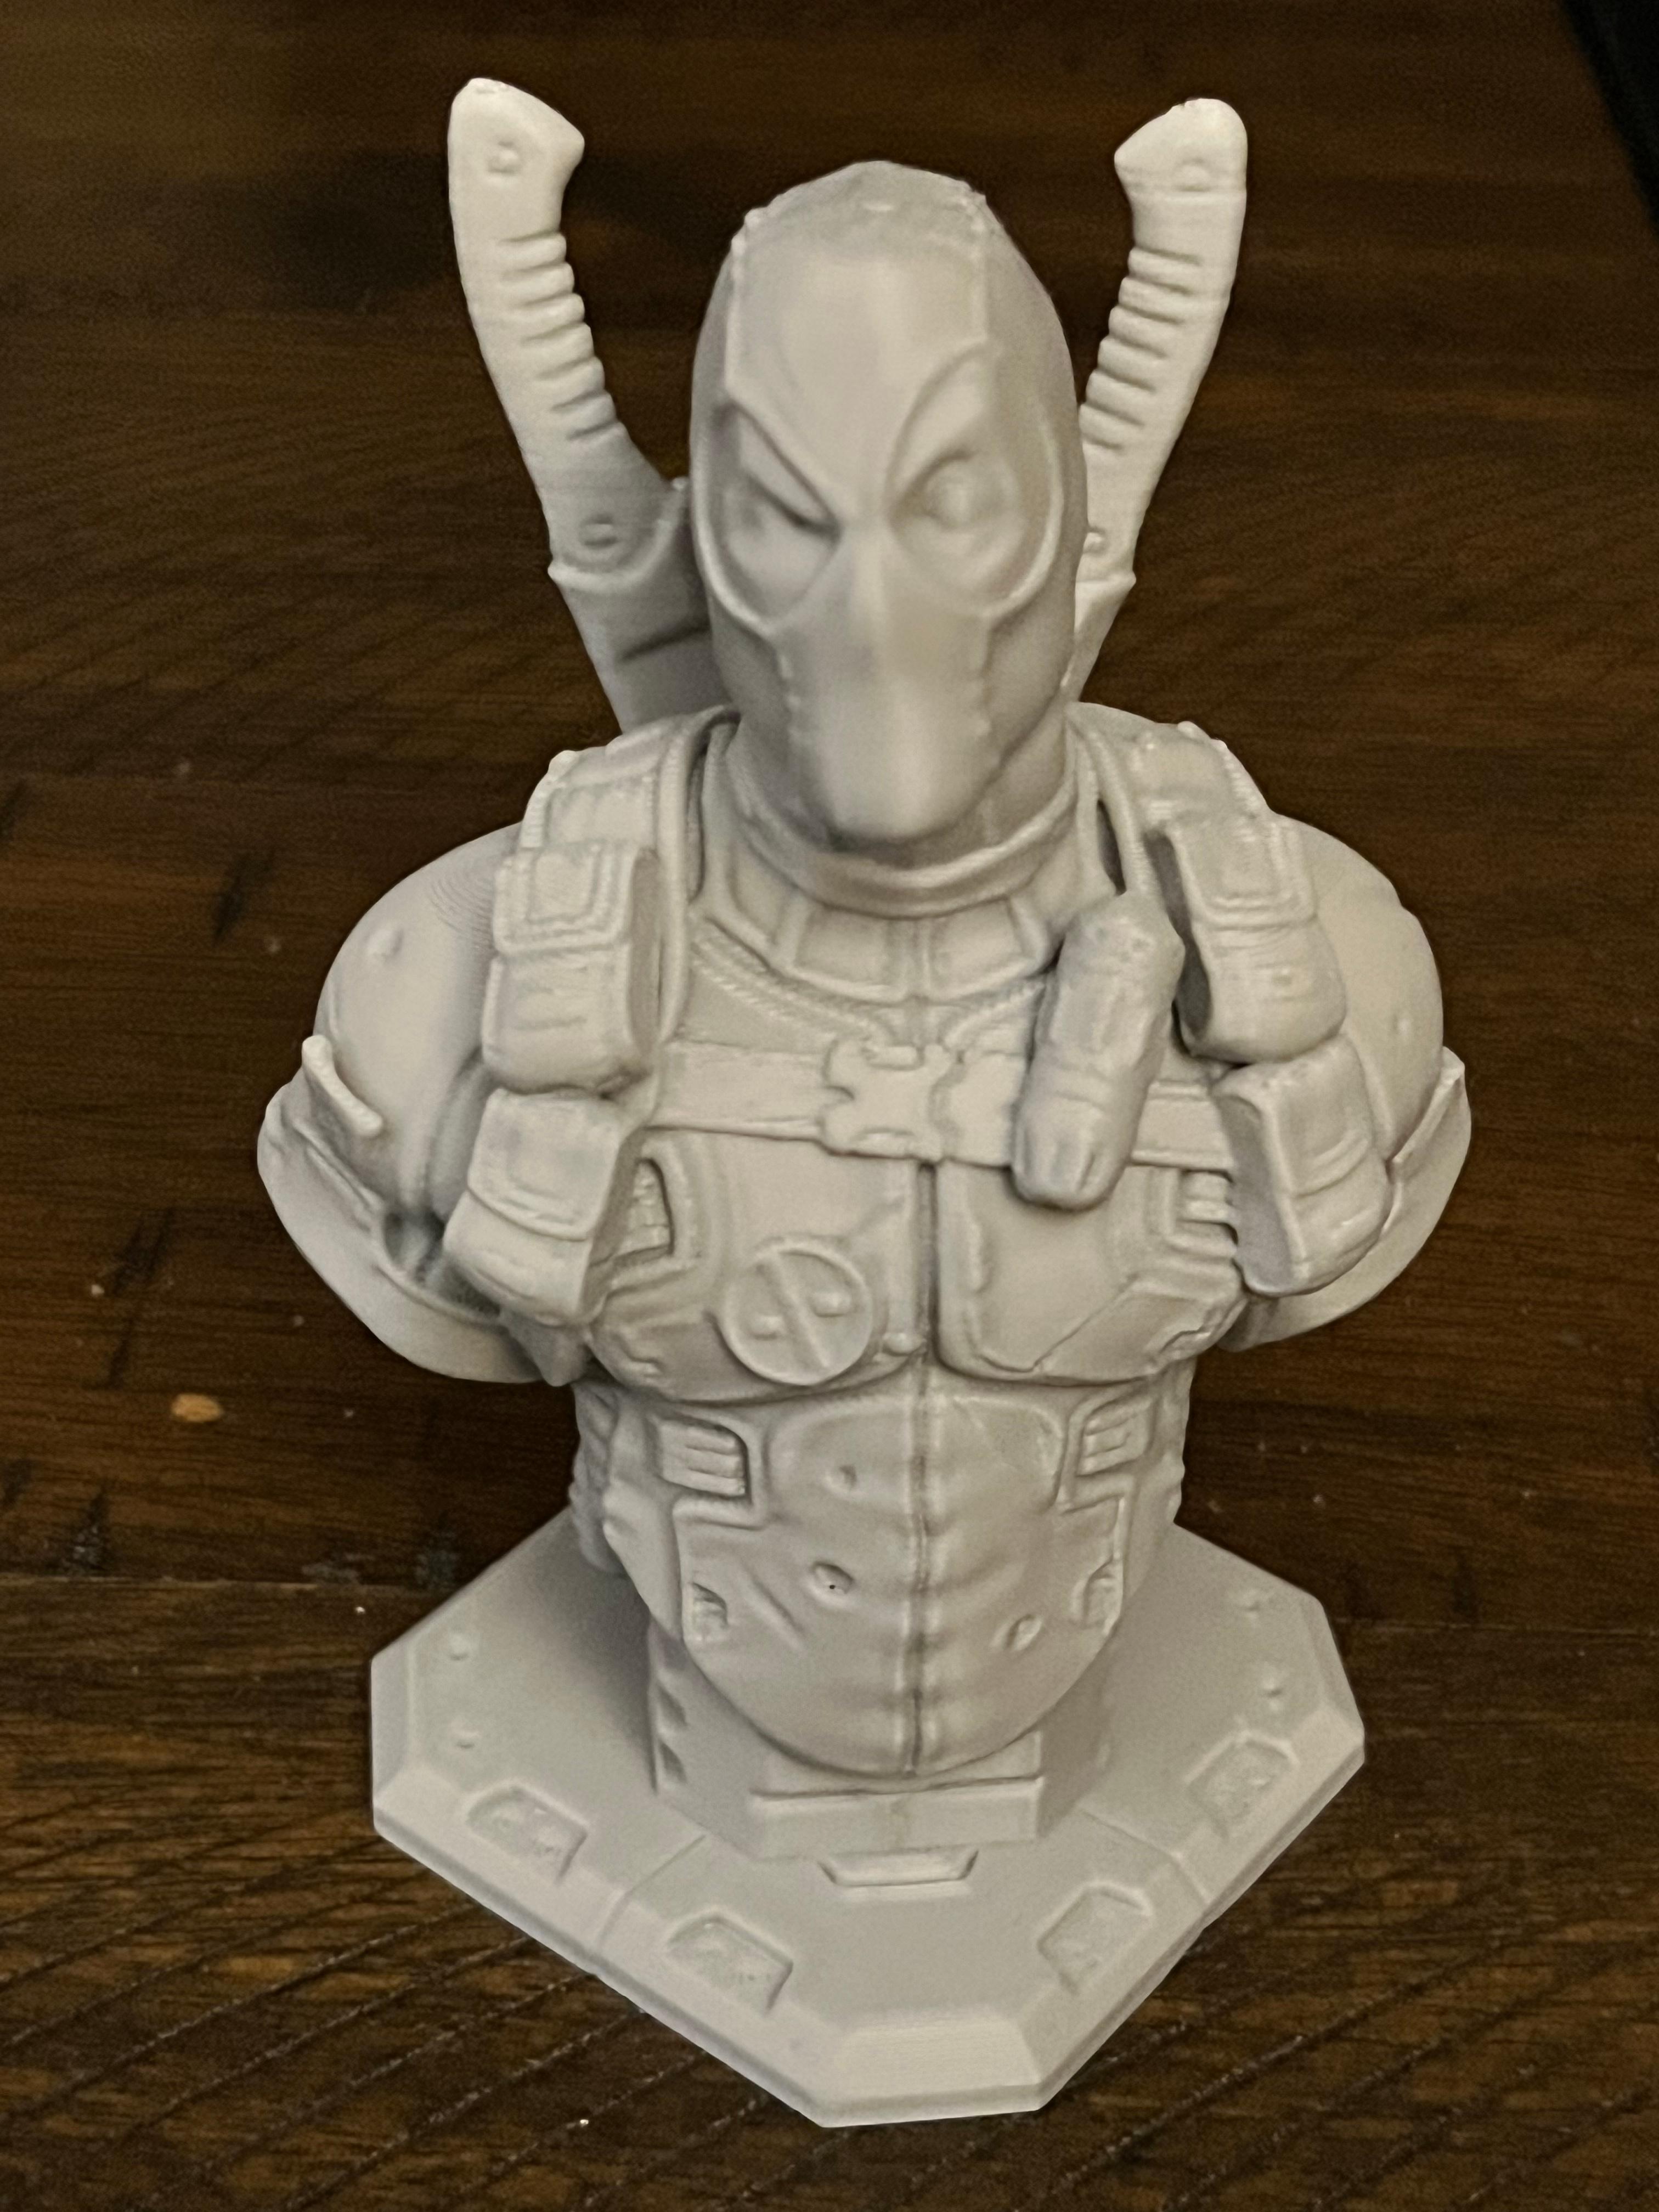 Deadpool bust (Remastered Supportless Edition) (fan art) - Came out beautifully, great design 0.4 nozzle 0.2 layer height in 5 hrs and 13 mins. 
Thank you for that great design.  - 3d model